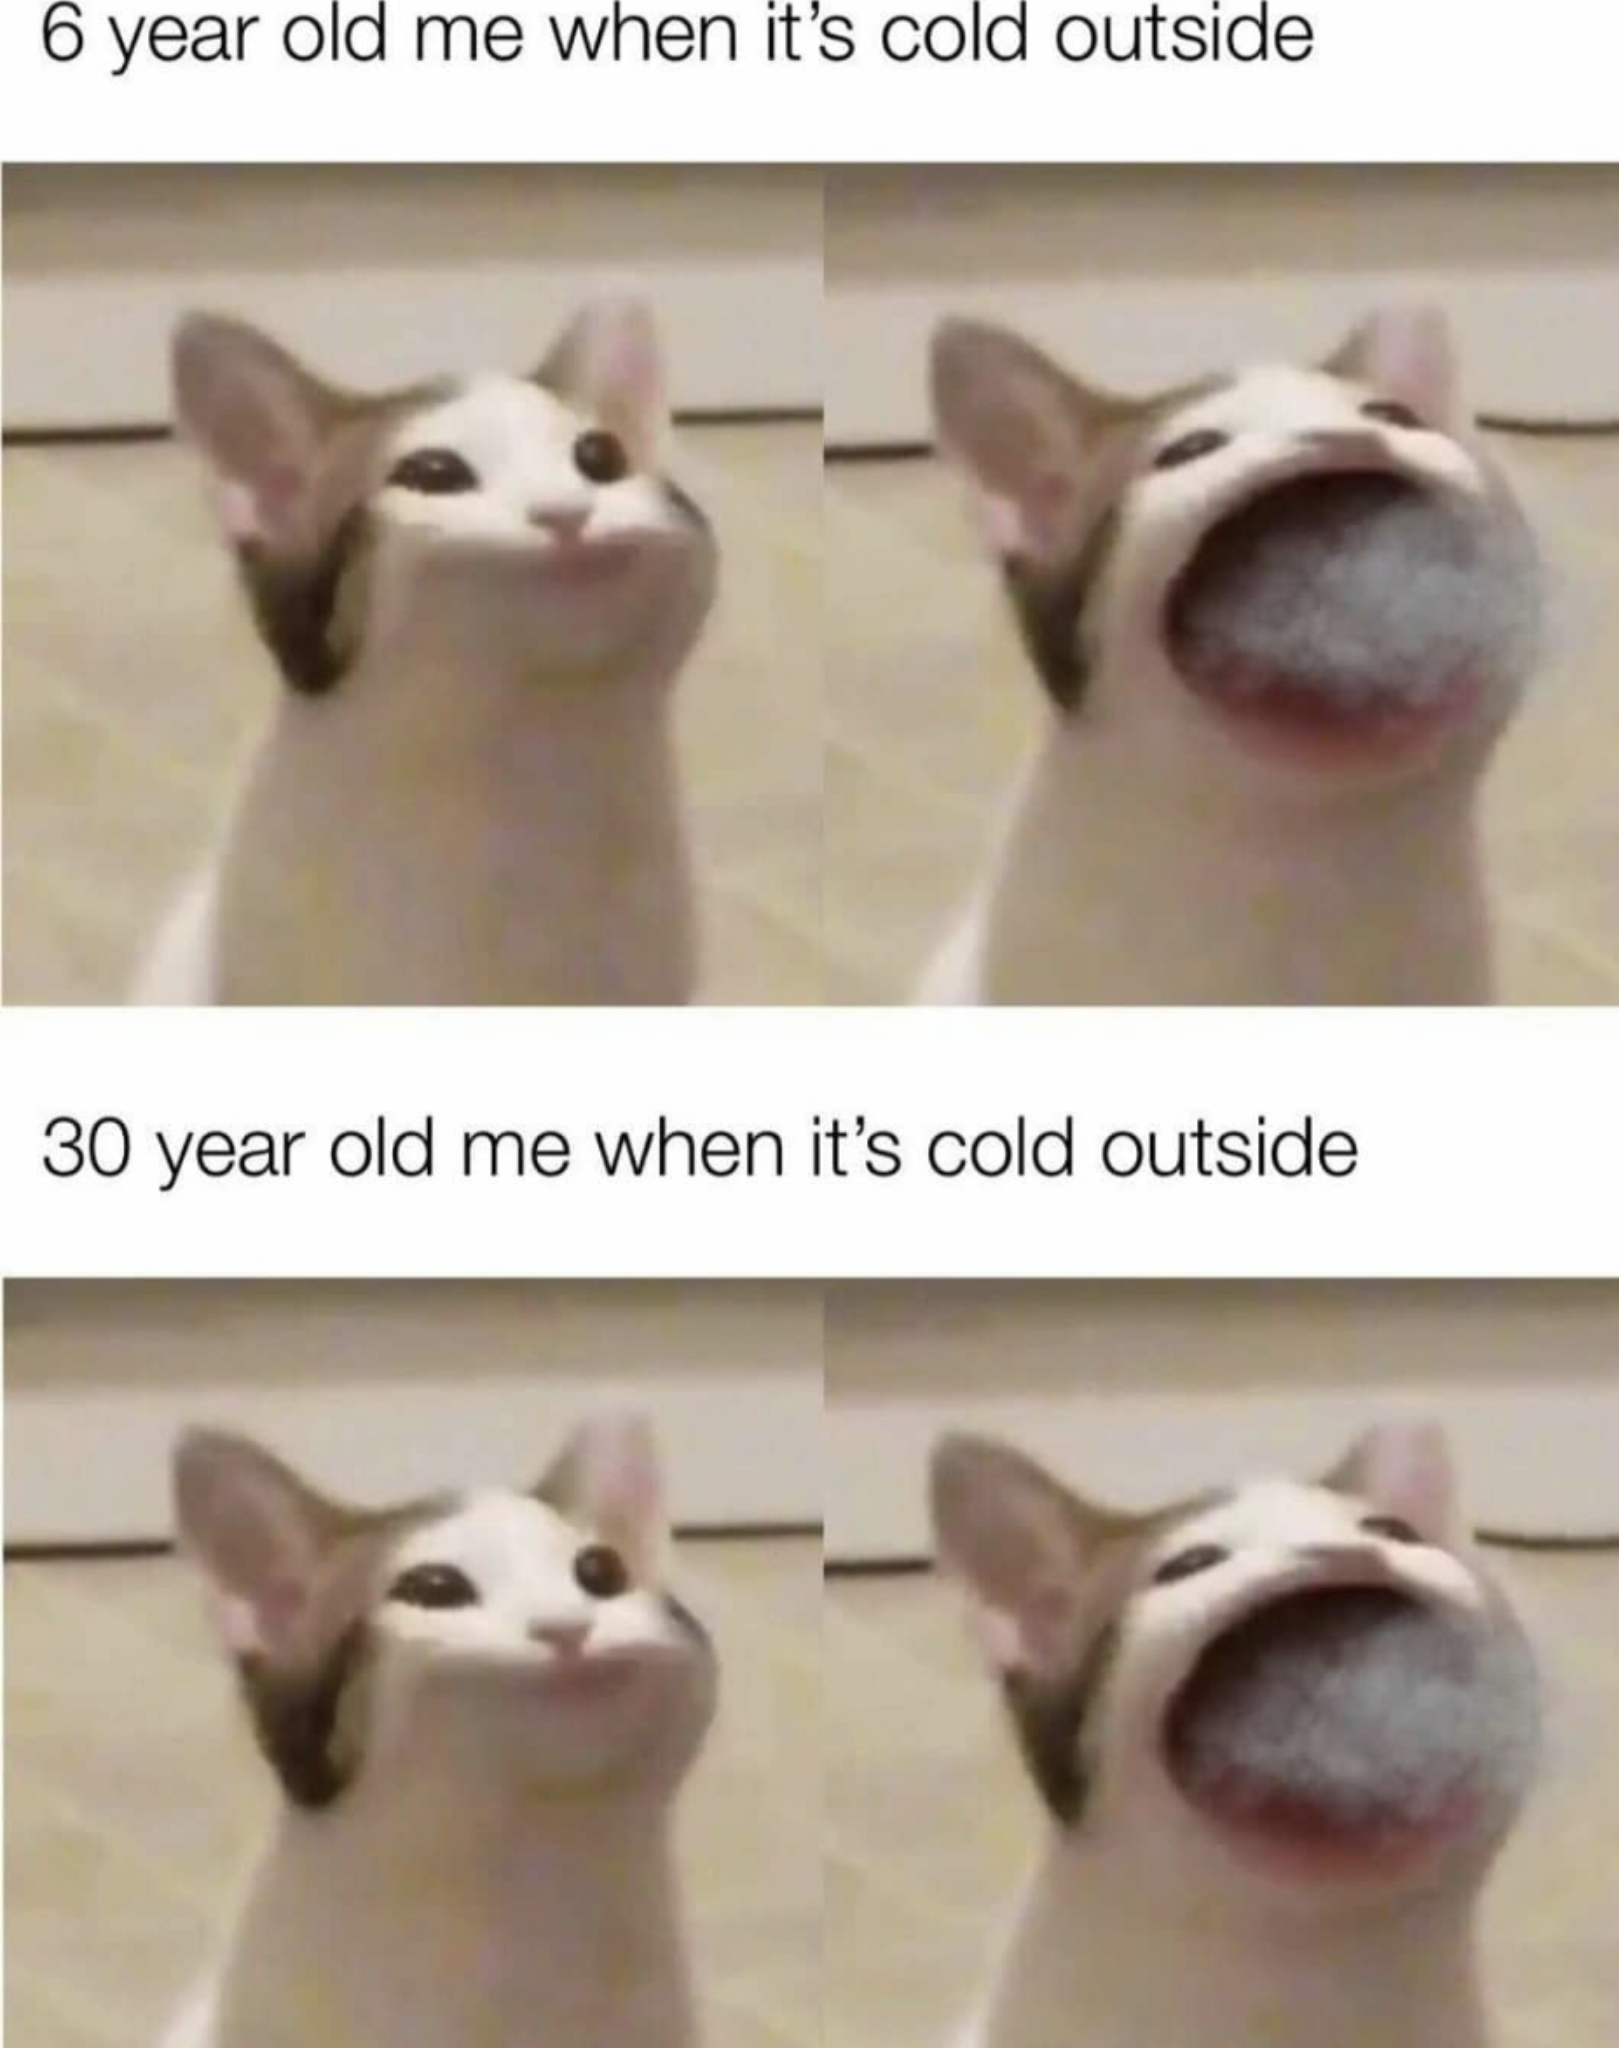 wide mouth cat meme - 6 year old me when it's cold outside 30 year old me when it's cold outside